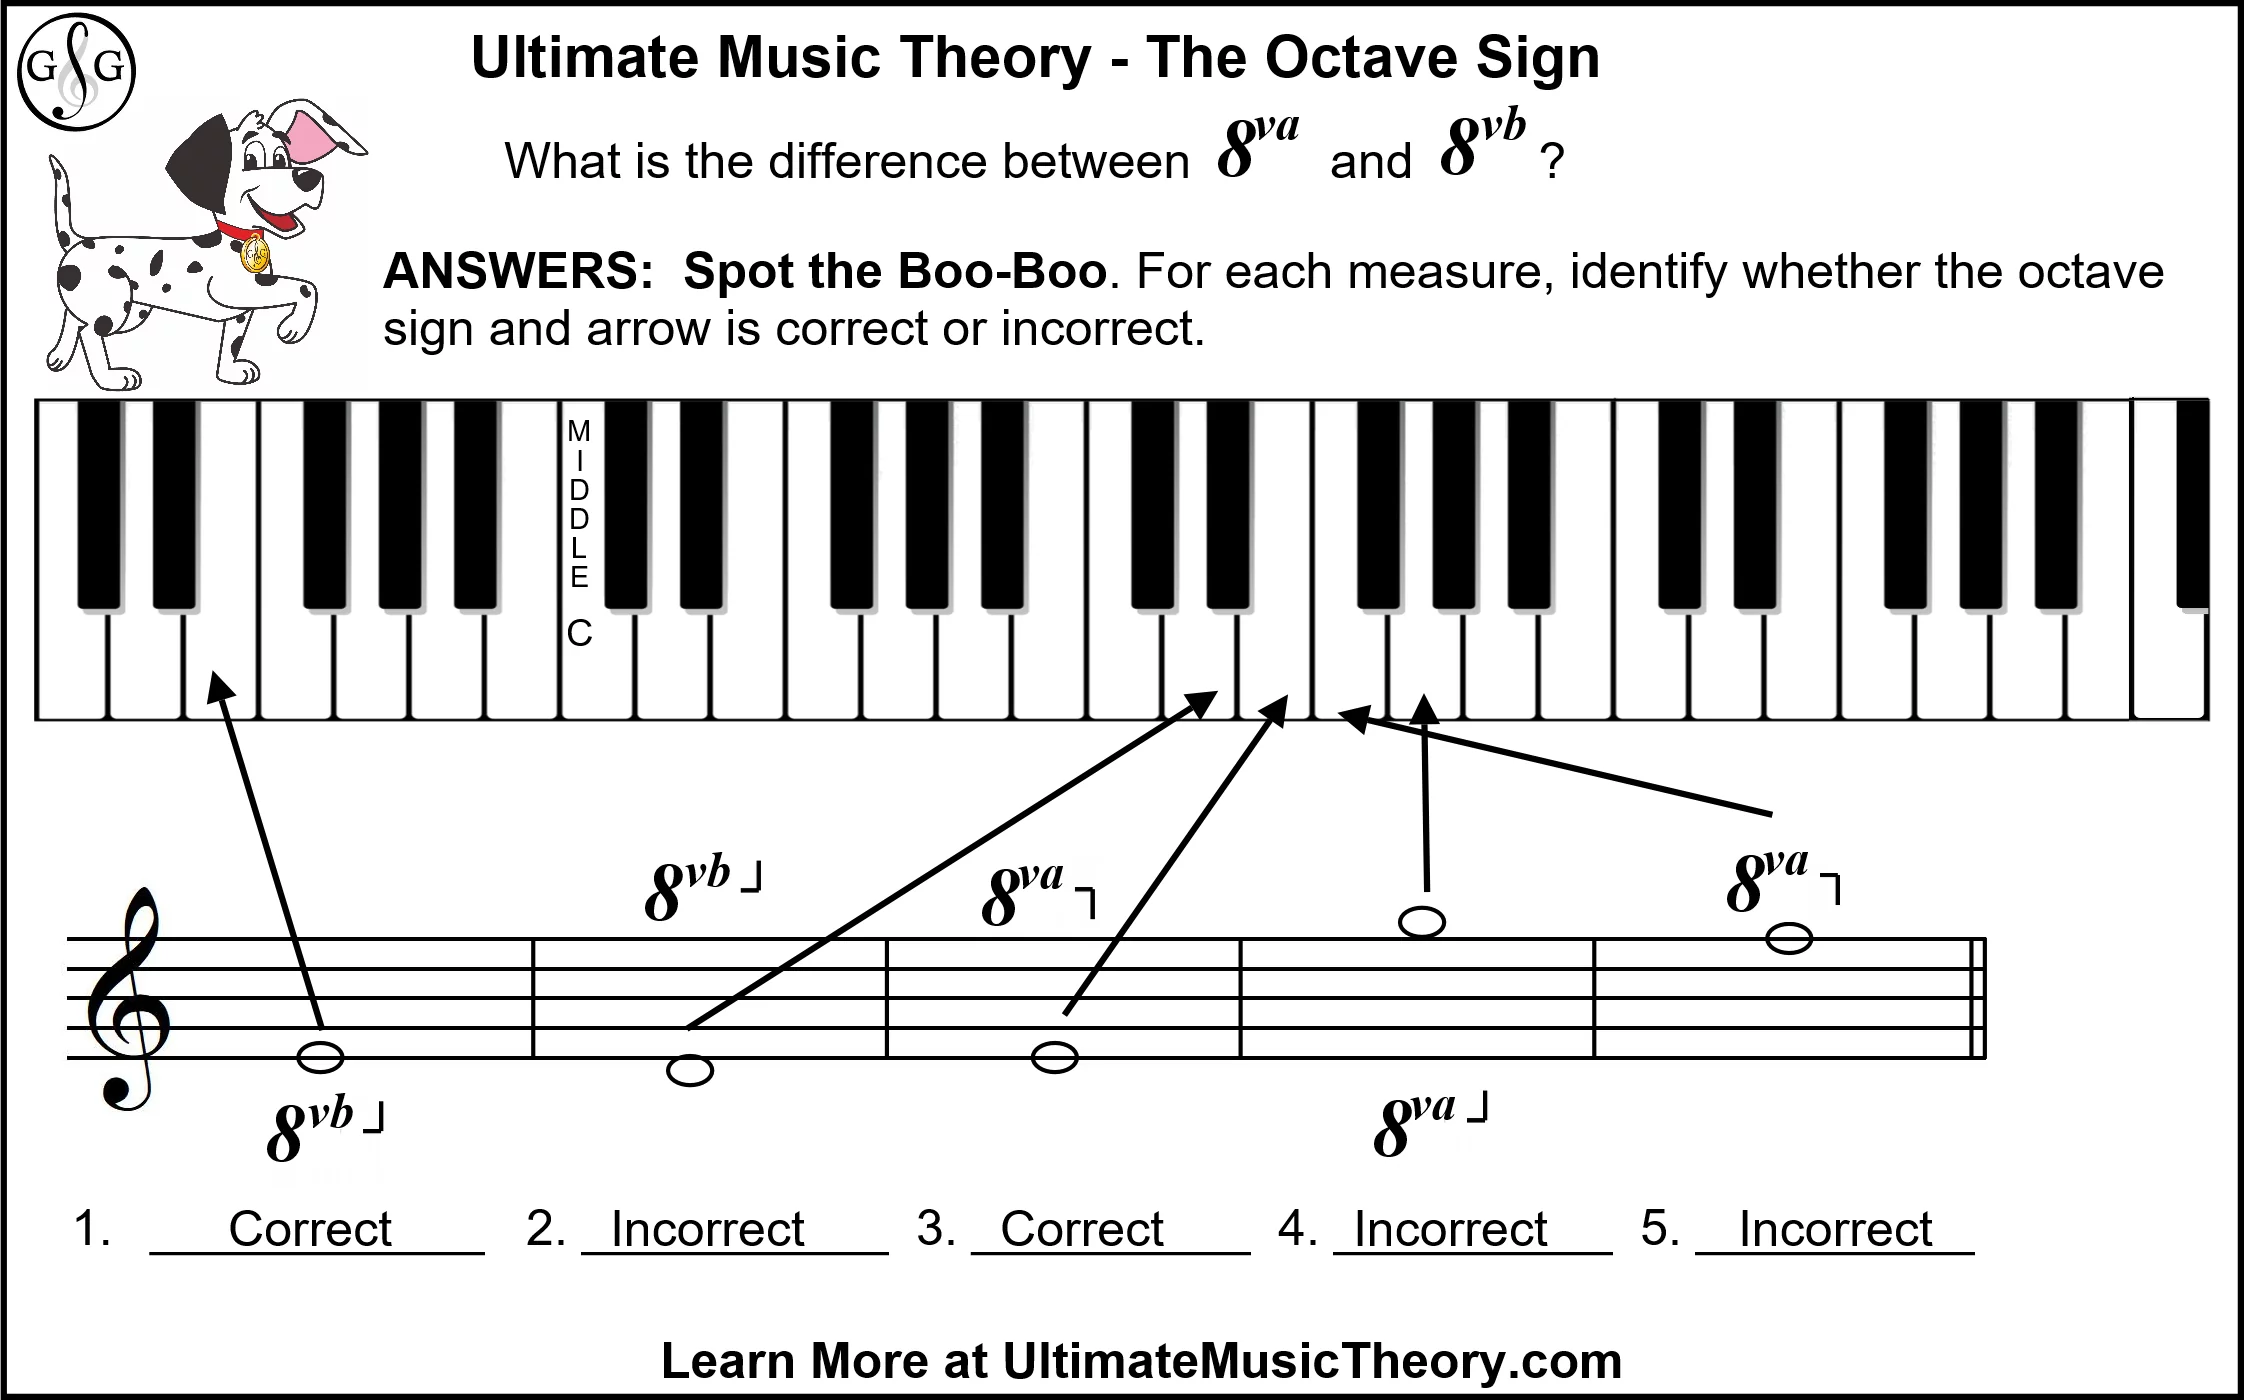 UMT Octave Sign Spot the Boo-Boo Answers